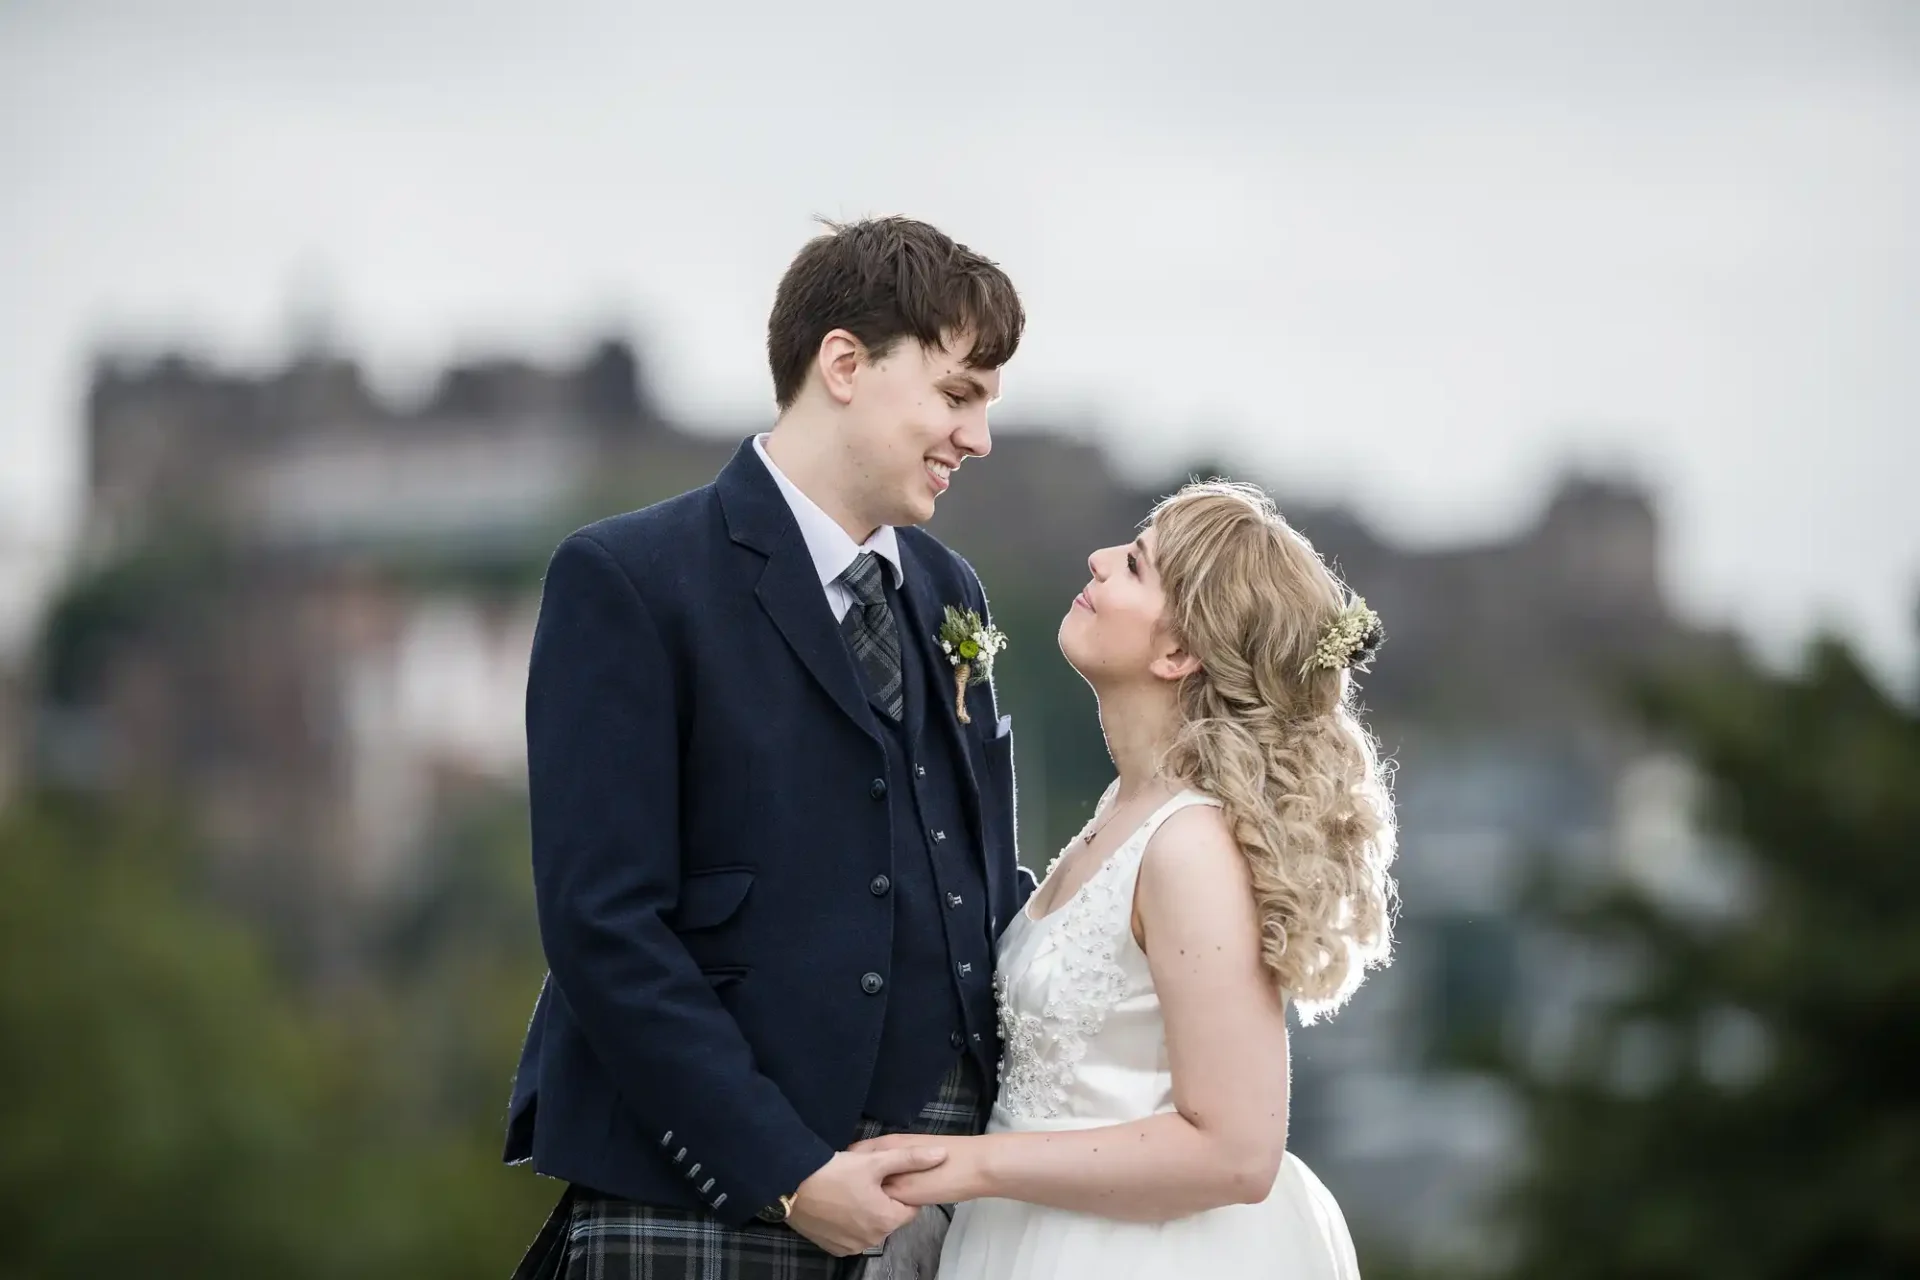 A bride and groom smiling at each other, wearing traditional scottish attire, with a castle in the background.